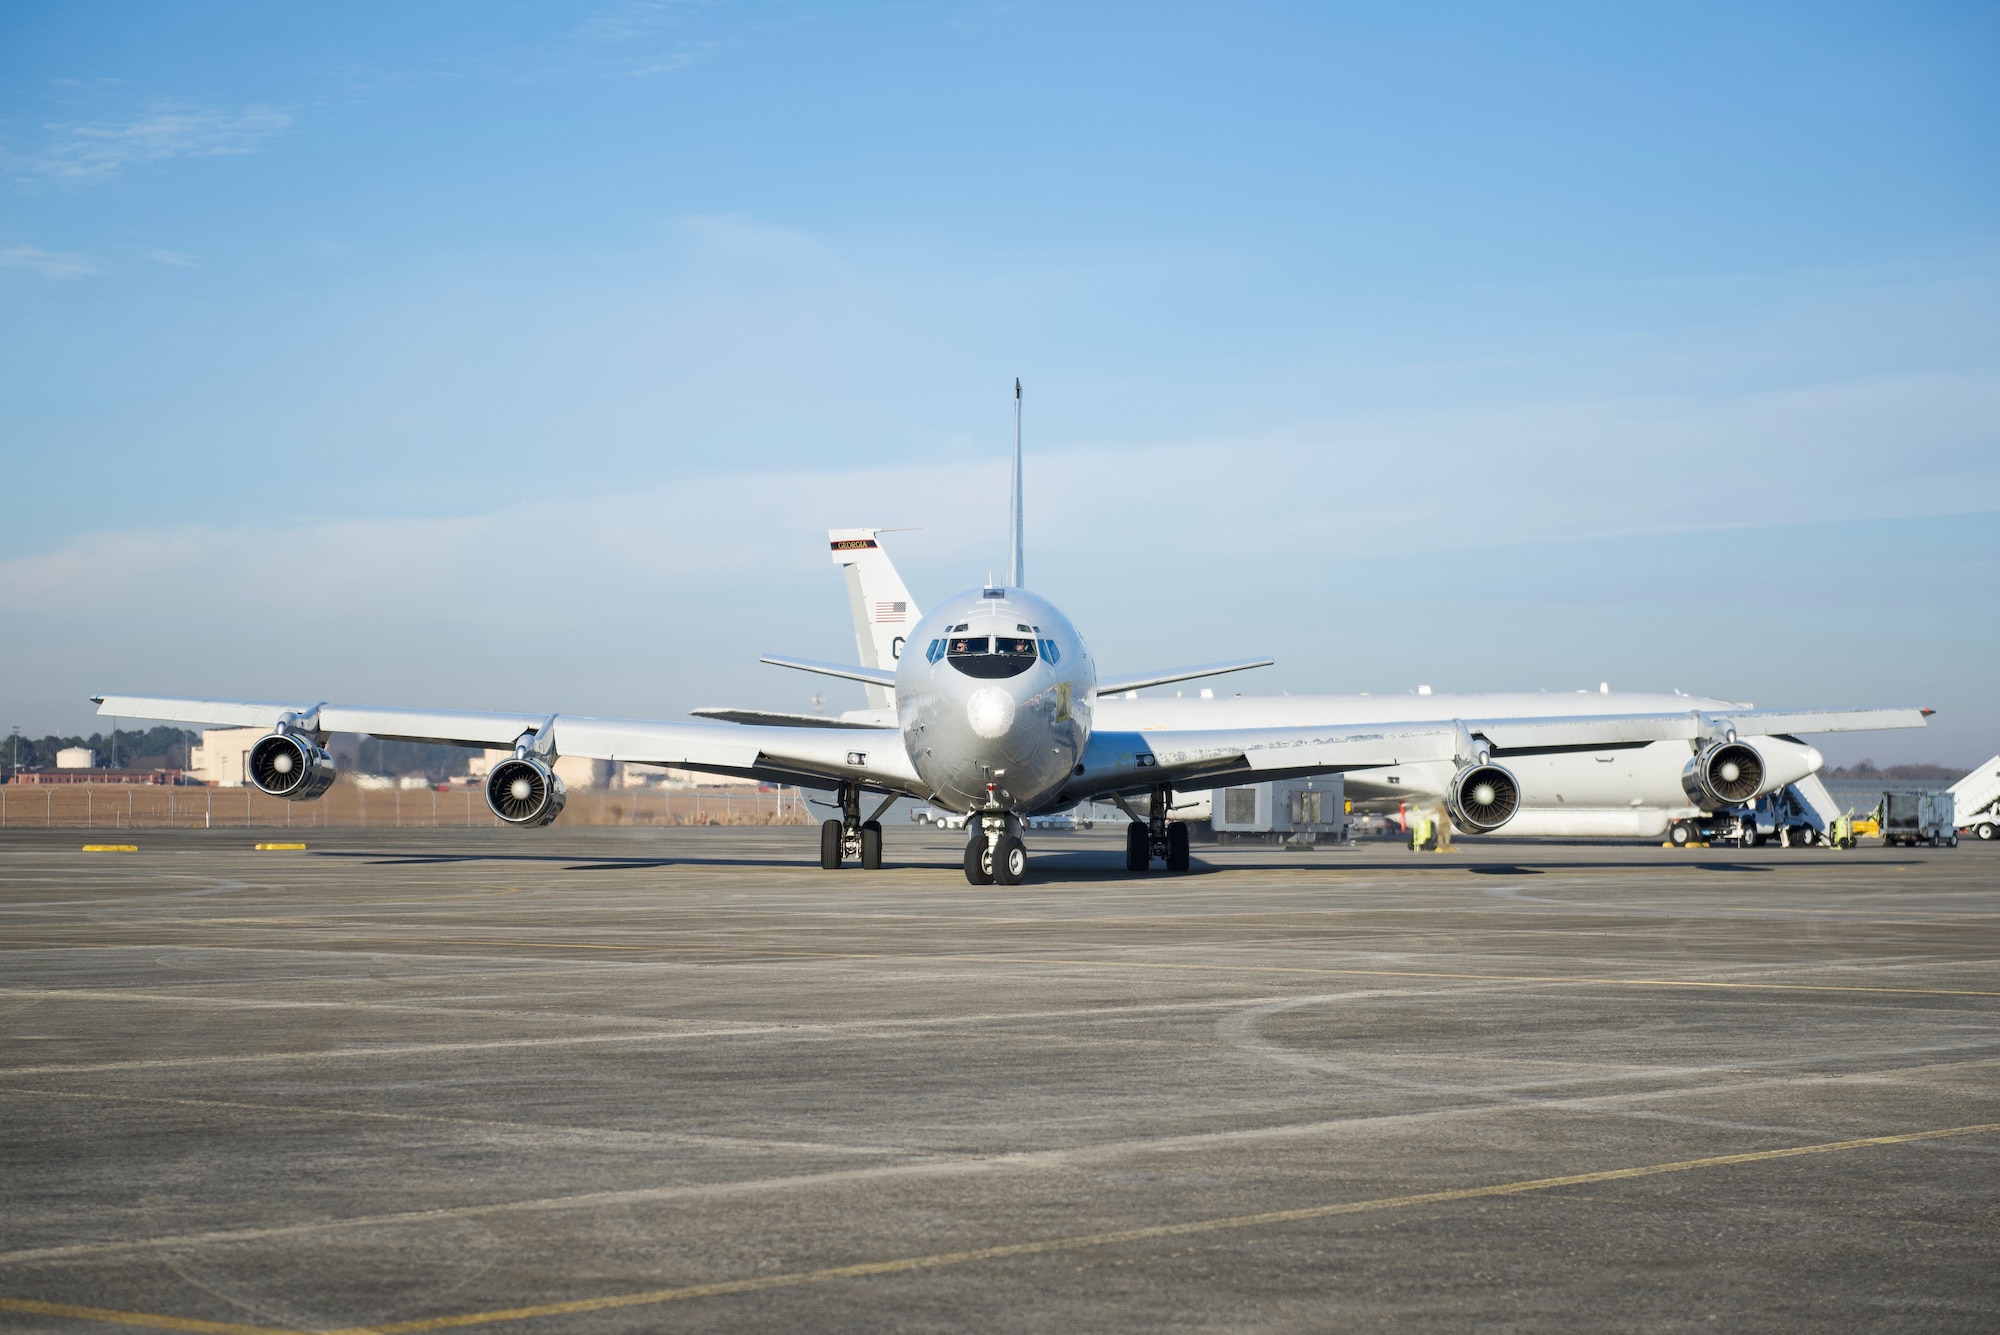 An E-8C Joint STARS aircraft taxis on the ramp prior to its final departure at Robins Air Force Base, Georgia, Feb. 11, 2022. 
The aircraft has been in military service since 1996 and will retire to its final resting place withe the 309th Aerospace Maintenance and Regeneration Group at Davis-Monthan Air Force Base, Arizona. (U.S. Air National Guard photo by Tech. Sgt. Michelle Self )